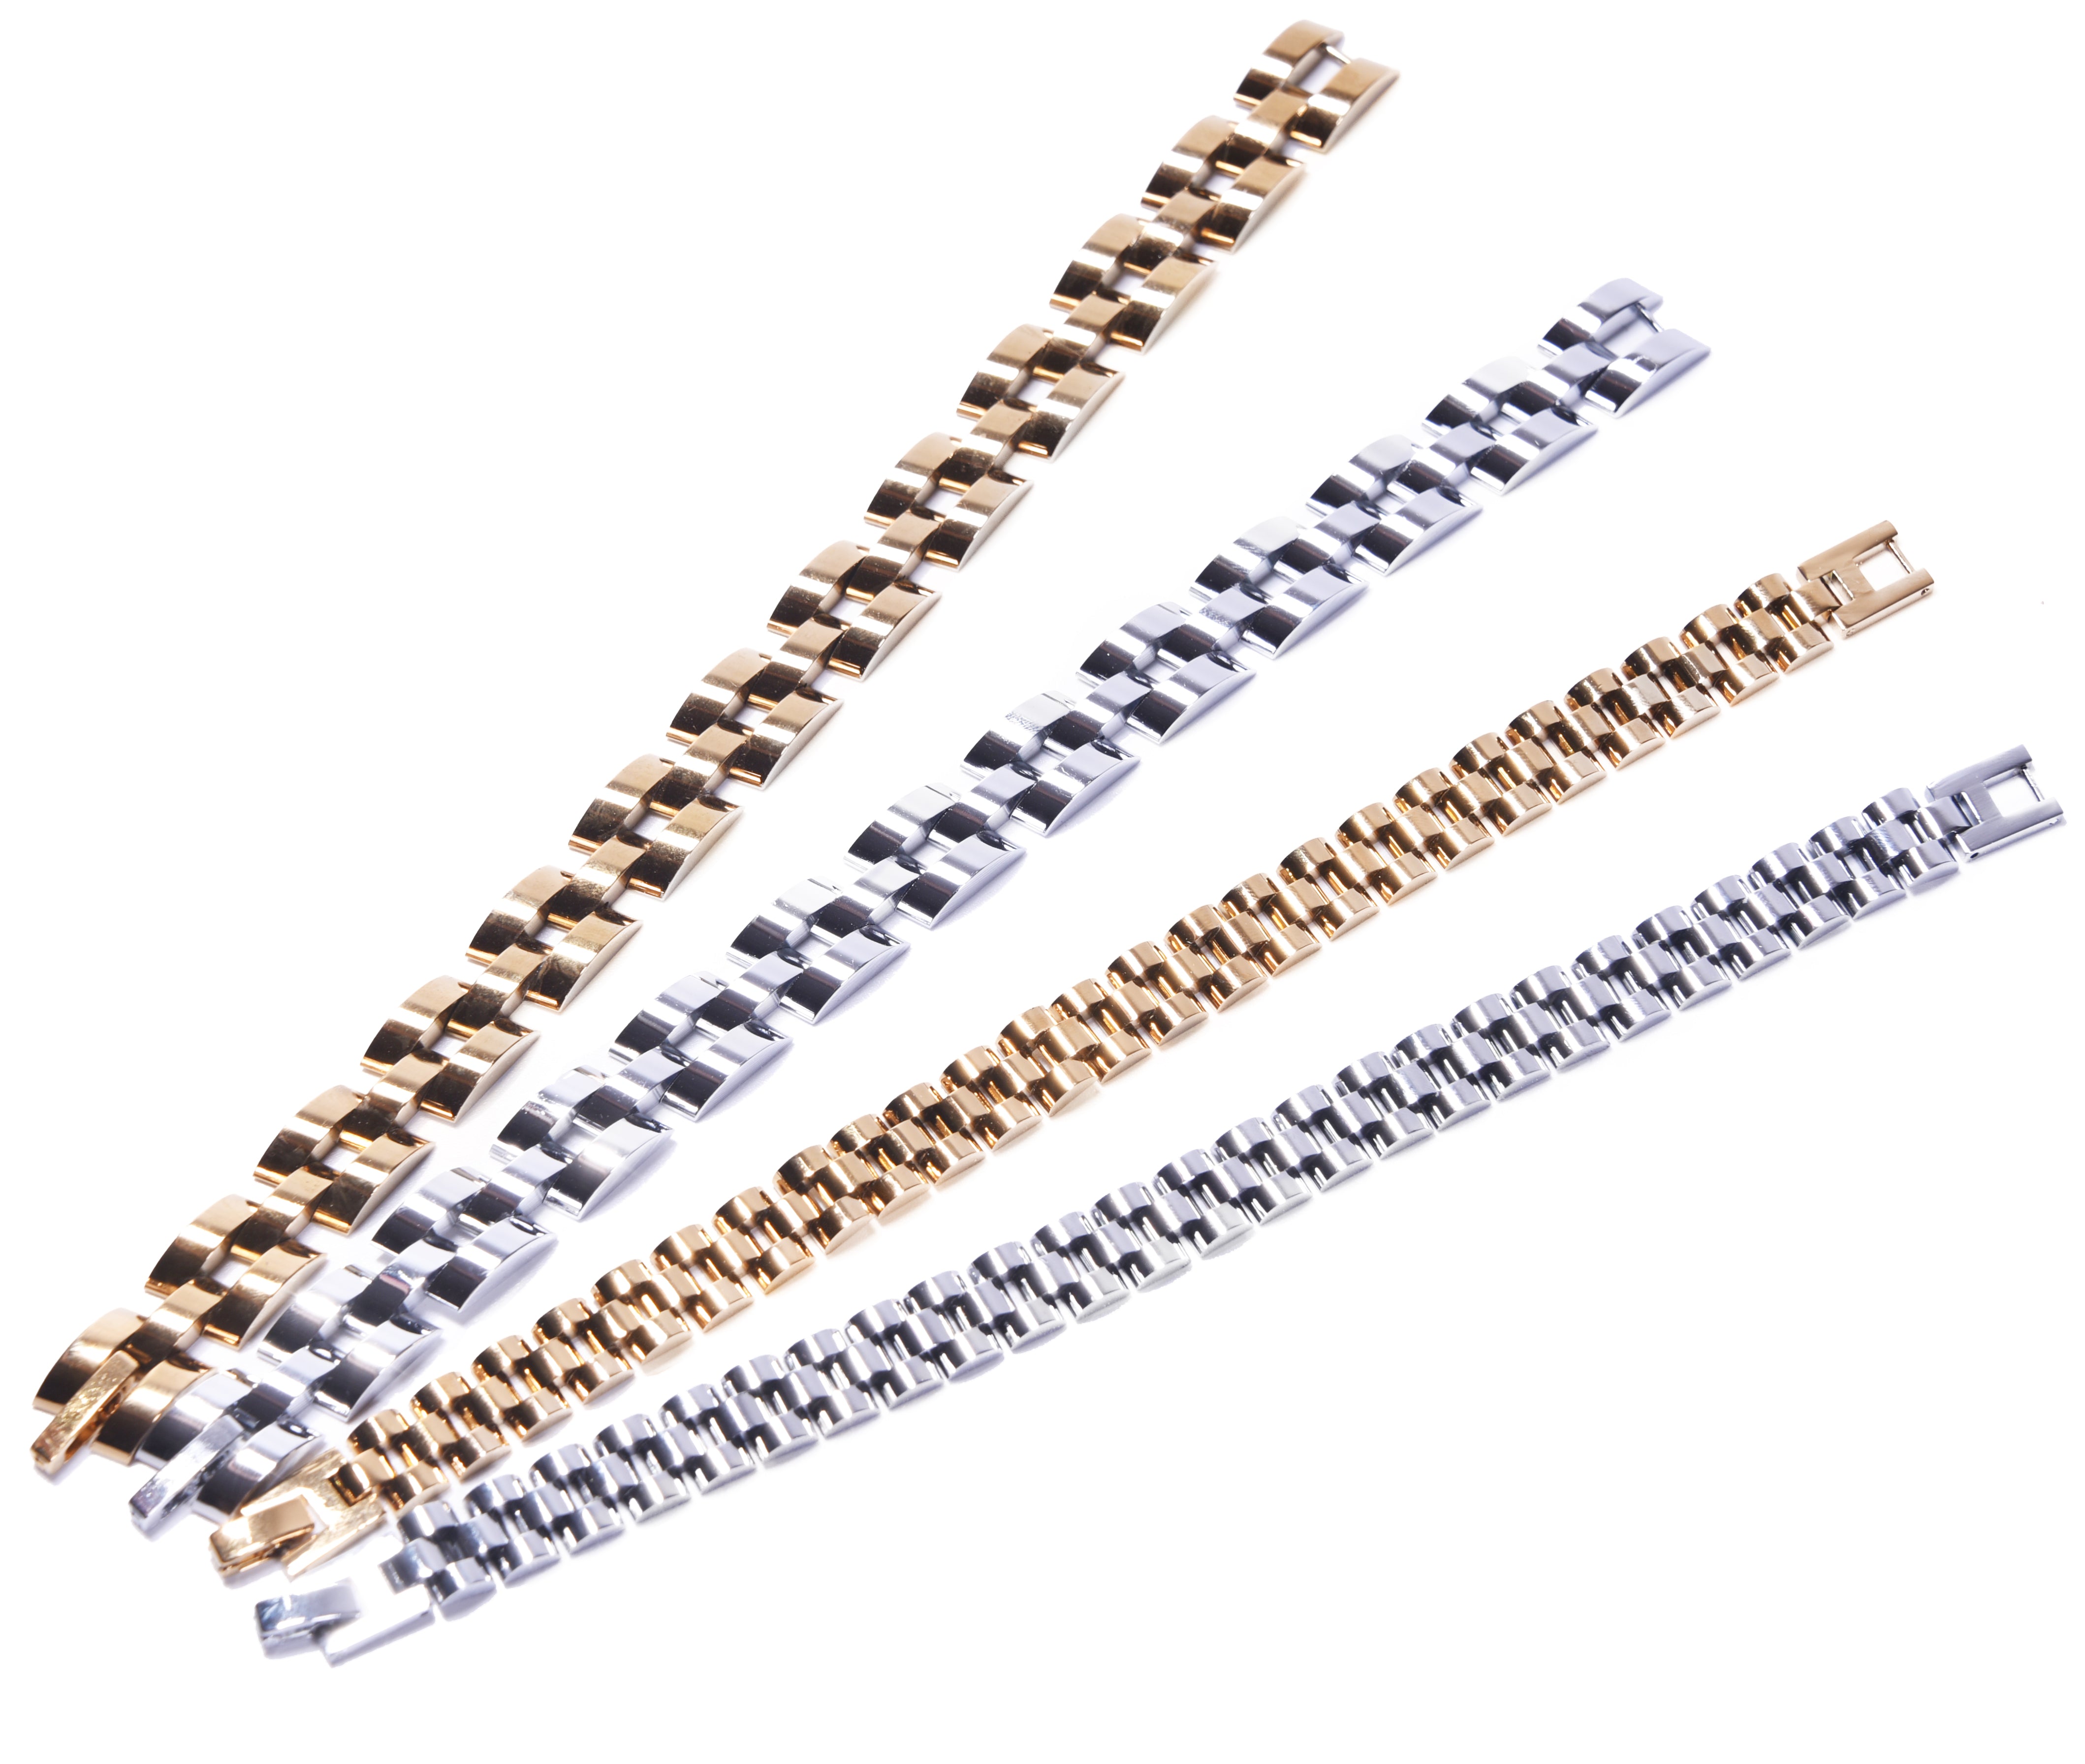 Gold Plated Wrist Chain - Large Links